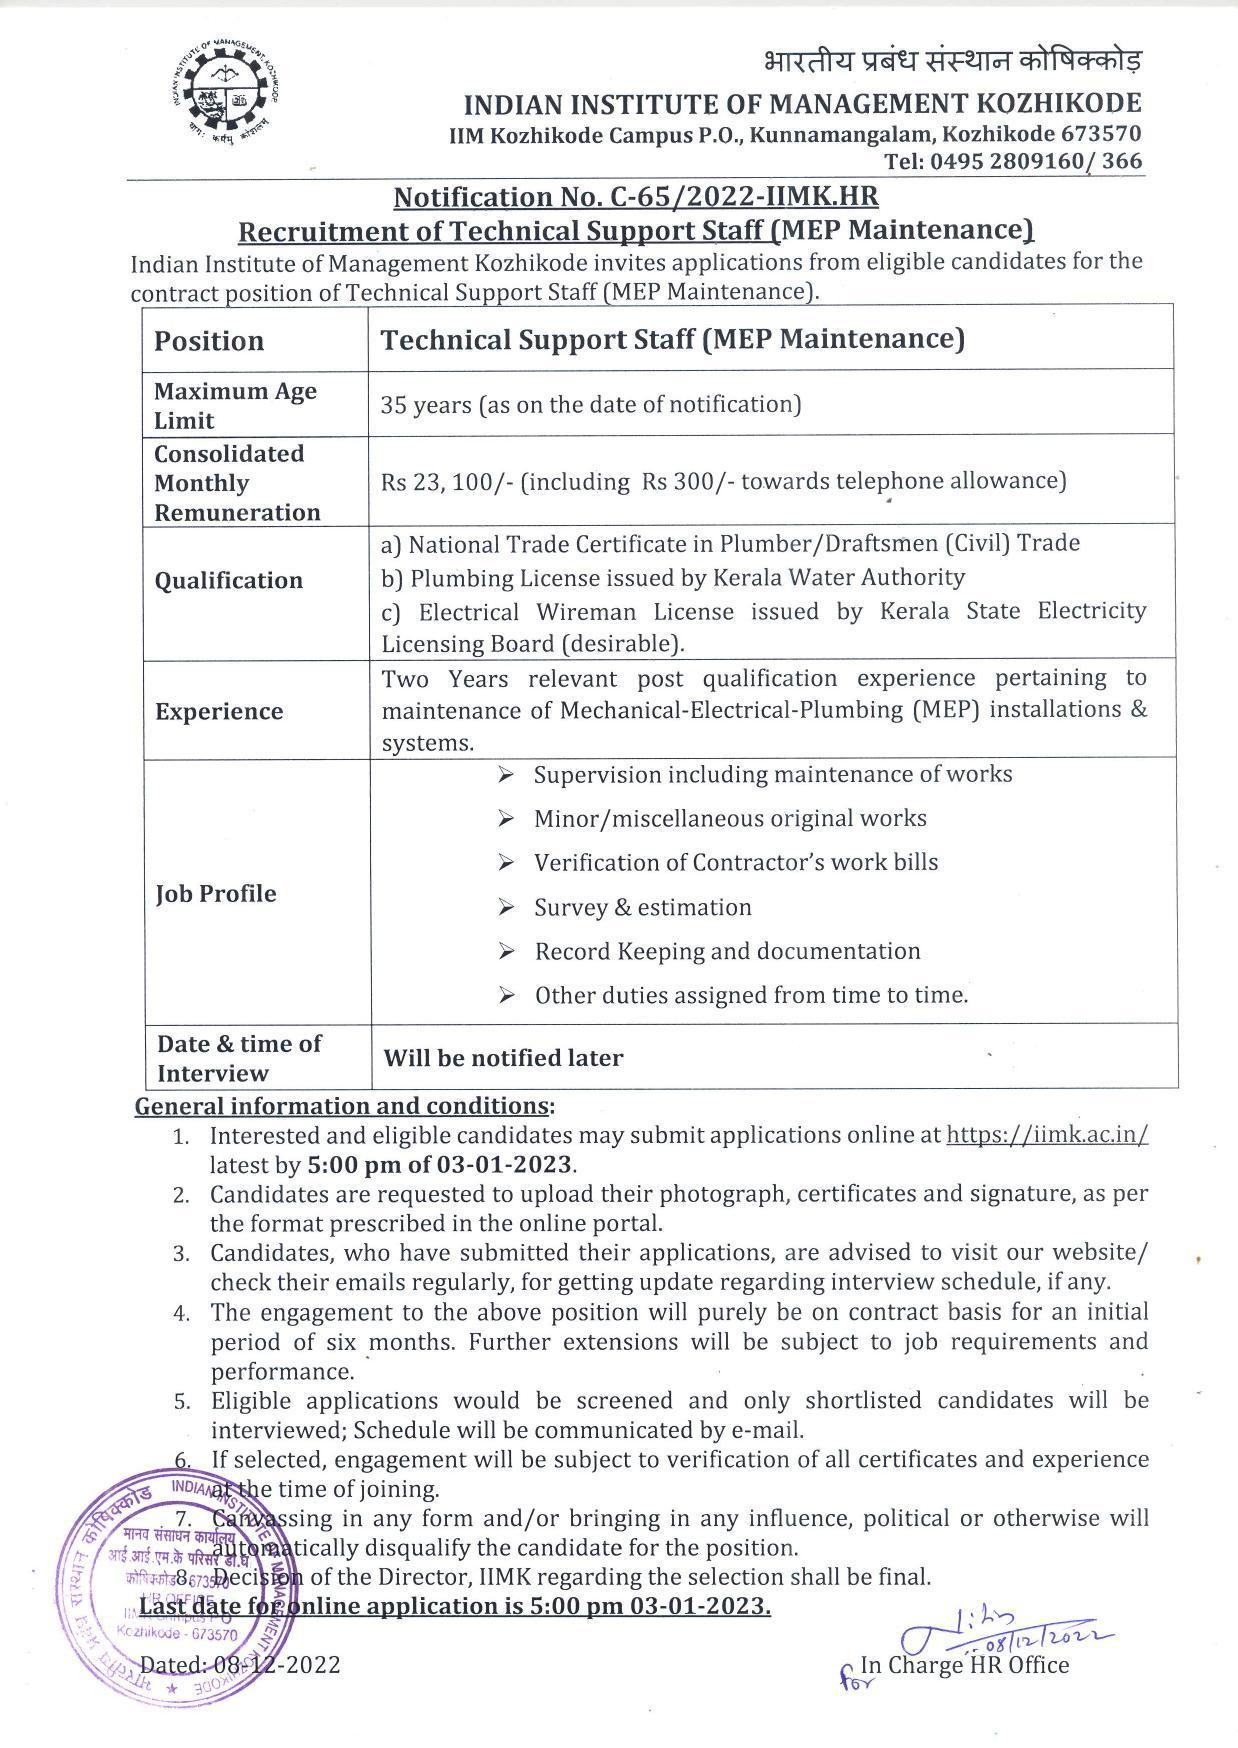 Indian Institute of Management Kozhikode Invites Application for Technical Support Staff Recruitment 2022 - Page 1